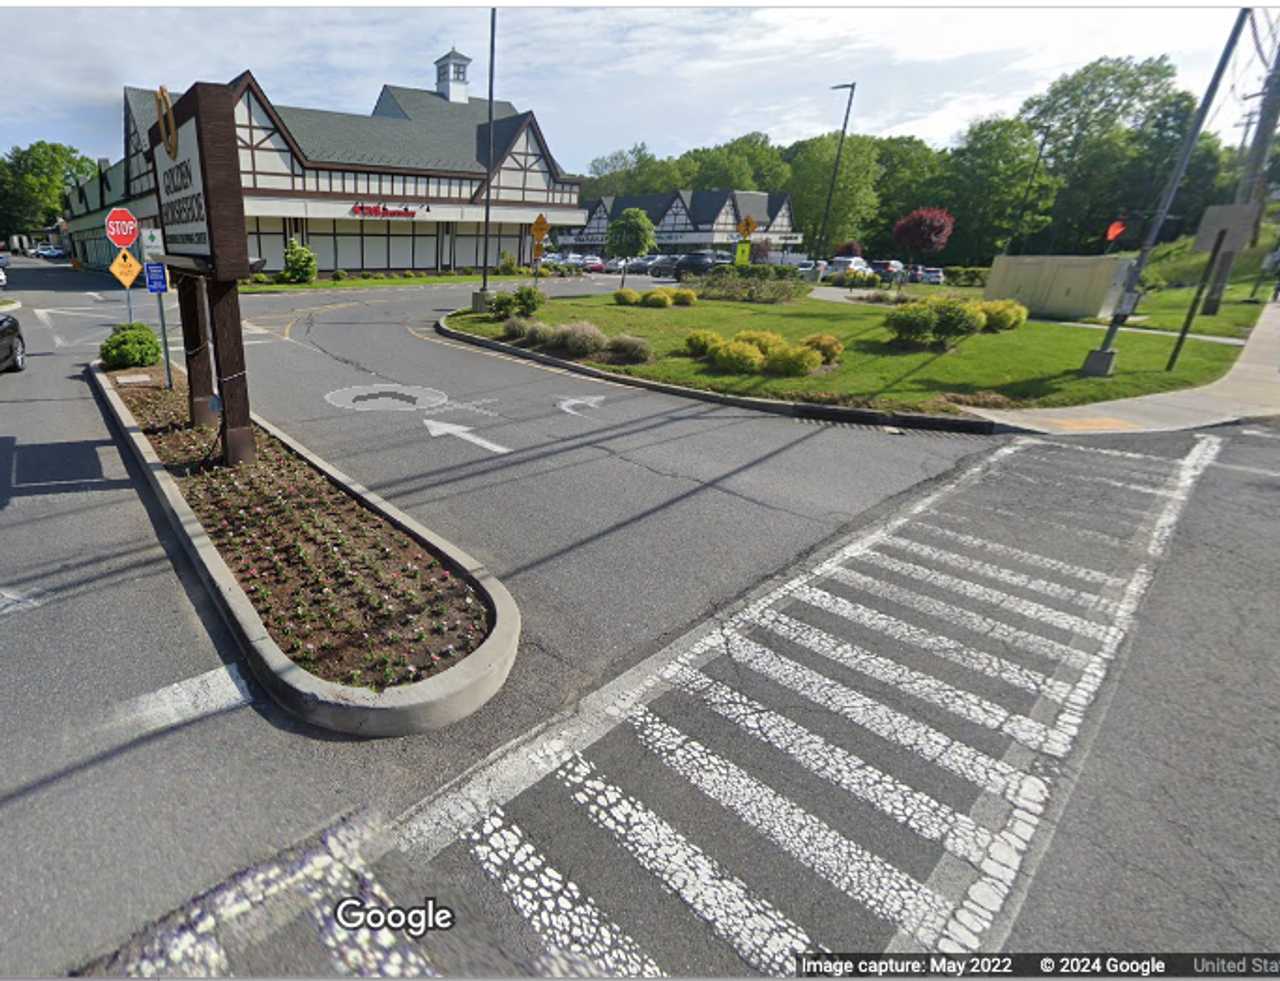 Victim In Fatal Crash At Shopping Center In New Rochelle ID'd As Iona Prep Student